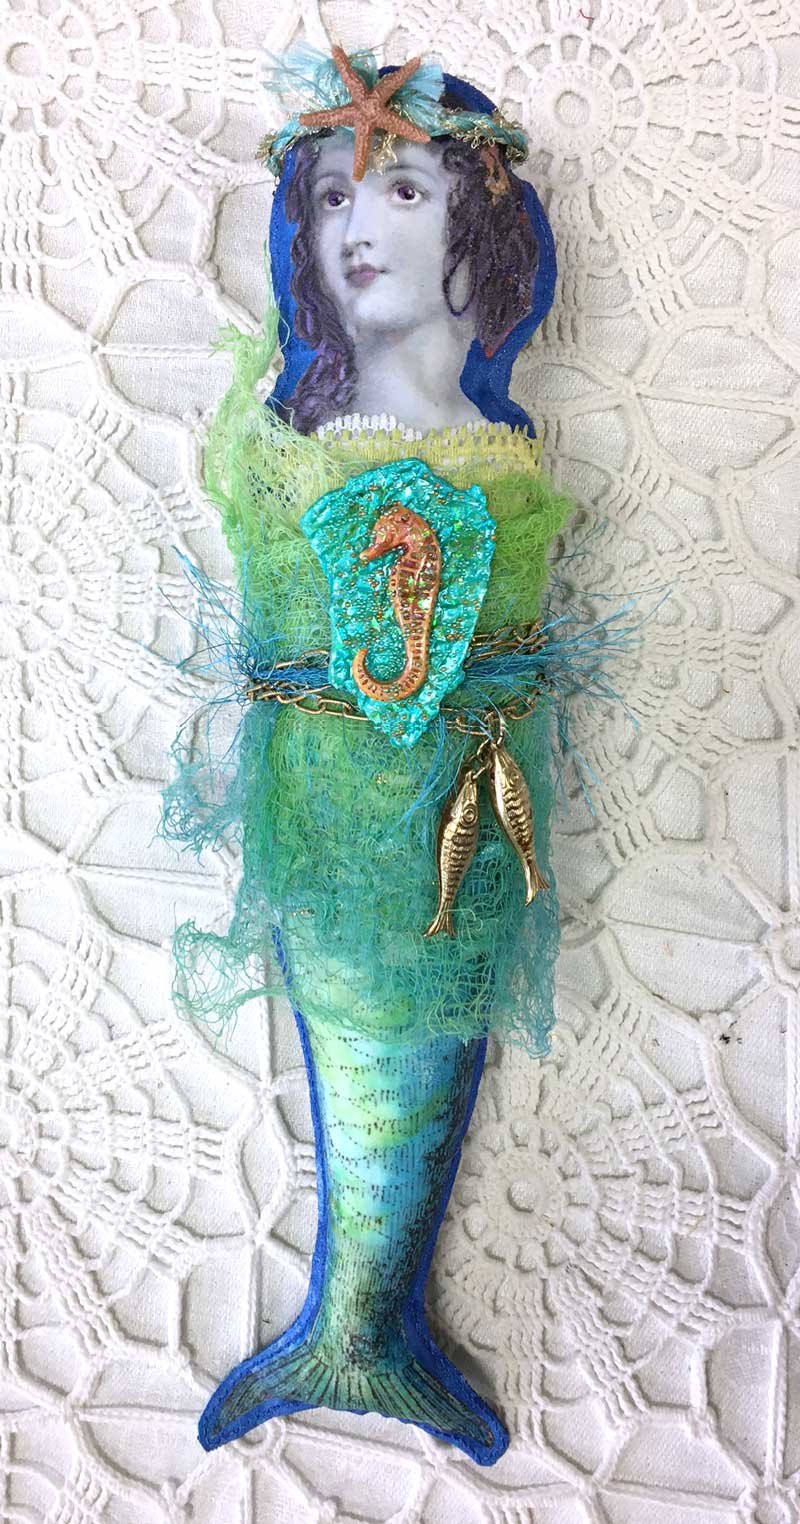 Sharon McDonagh Fragment Doll, a project from The Ultimate Guide to Transfer Artist Paper by Lesley Riley